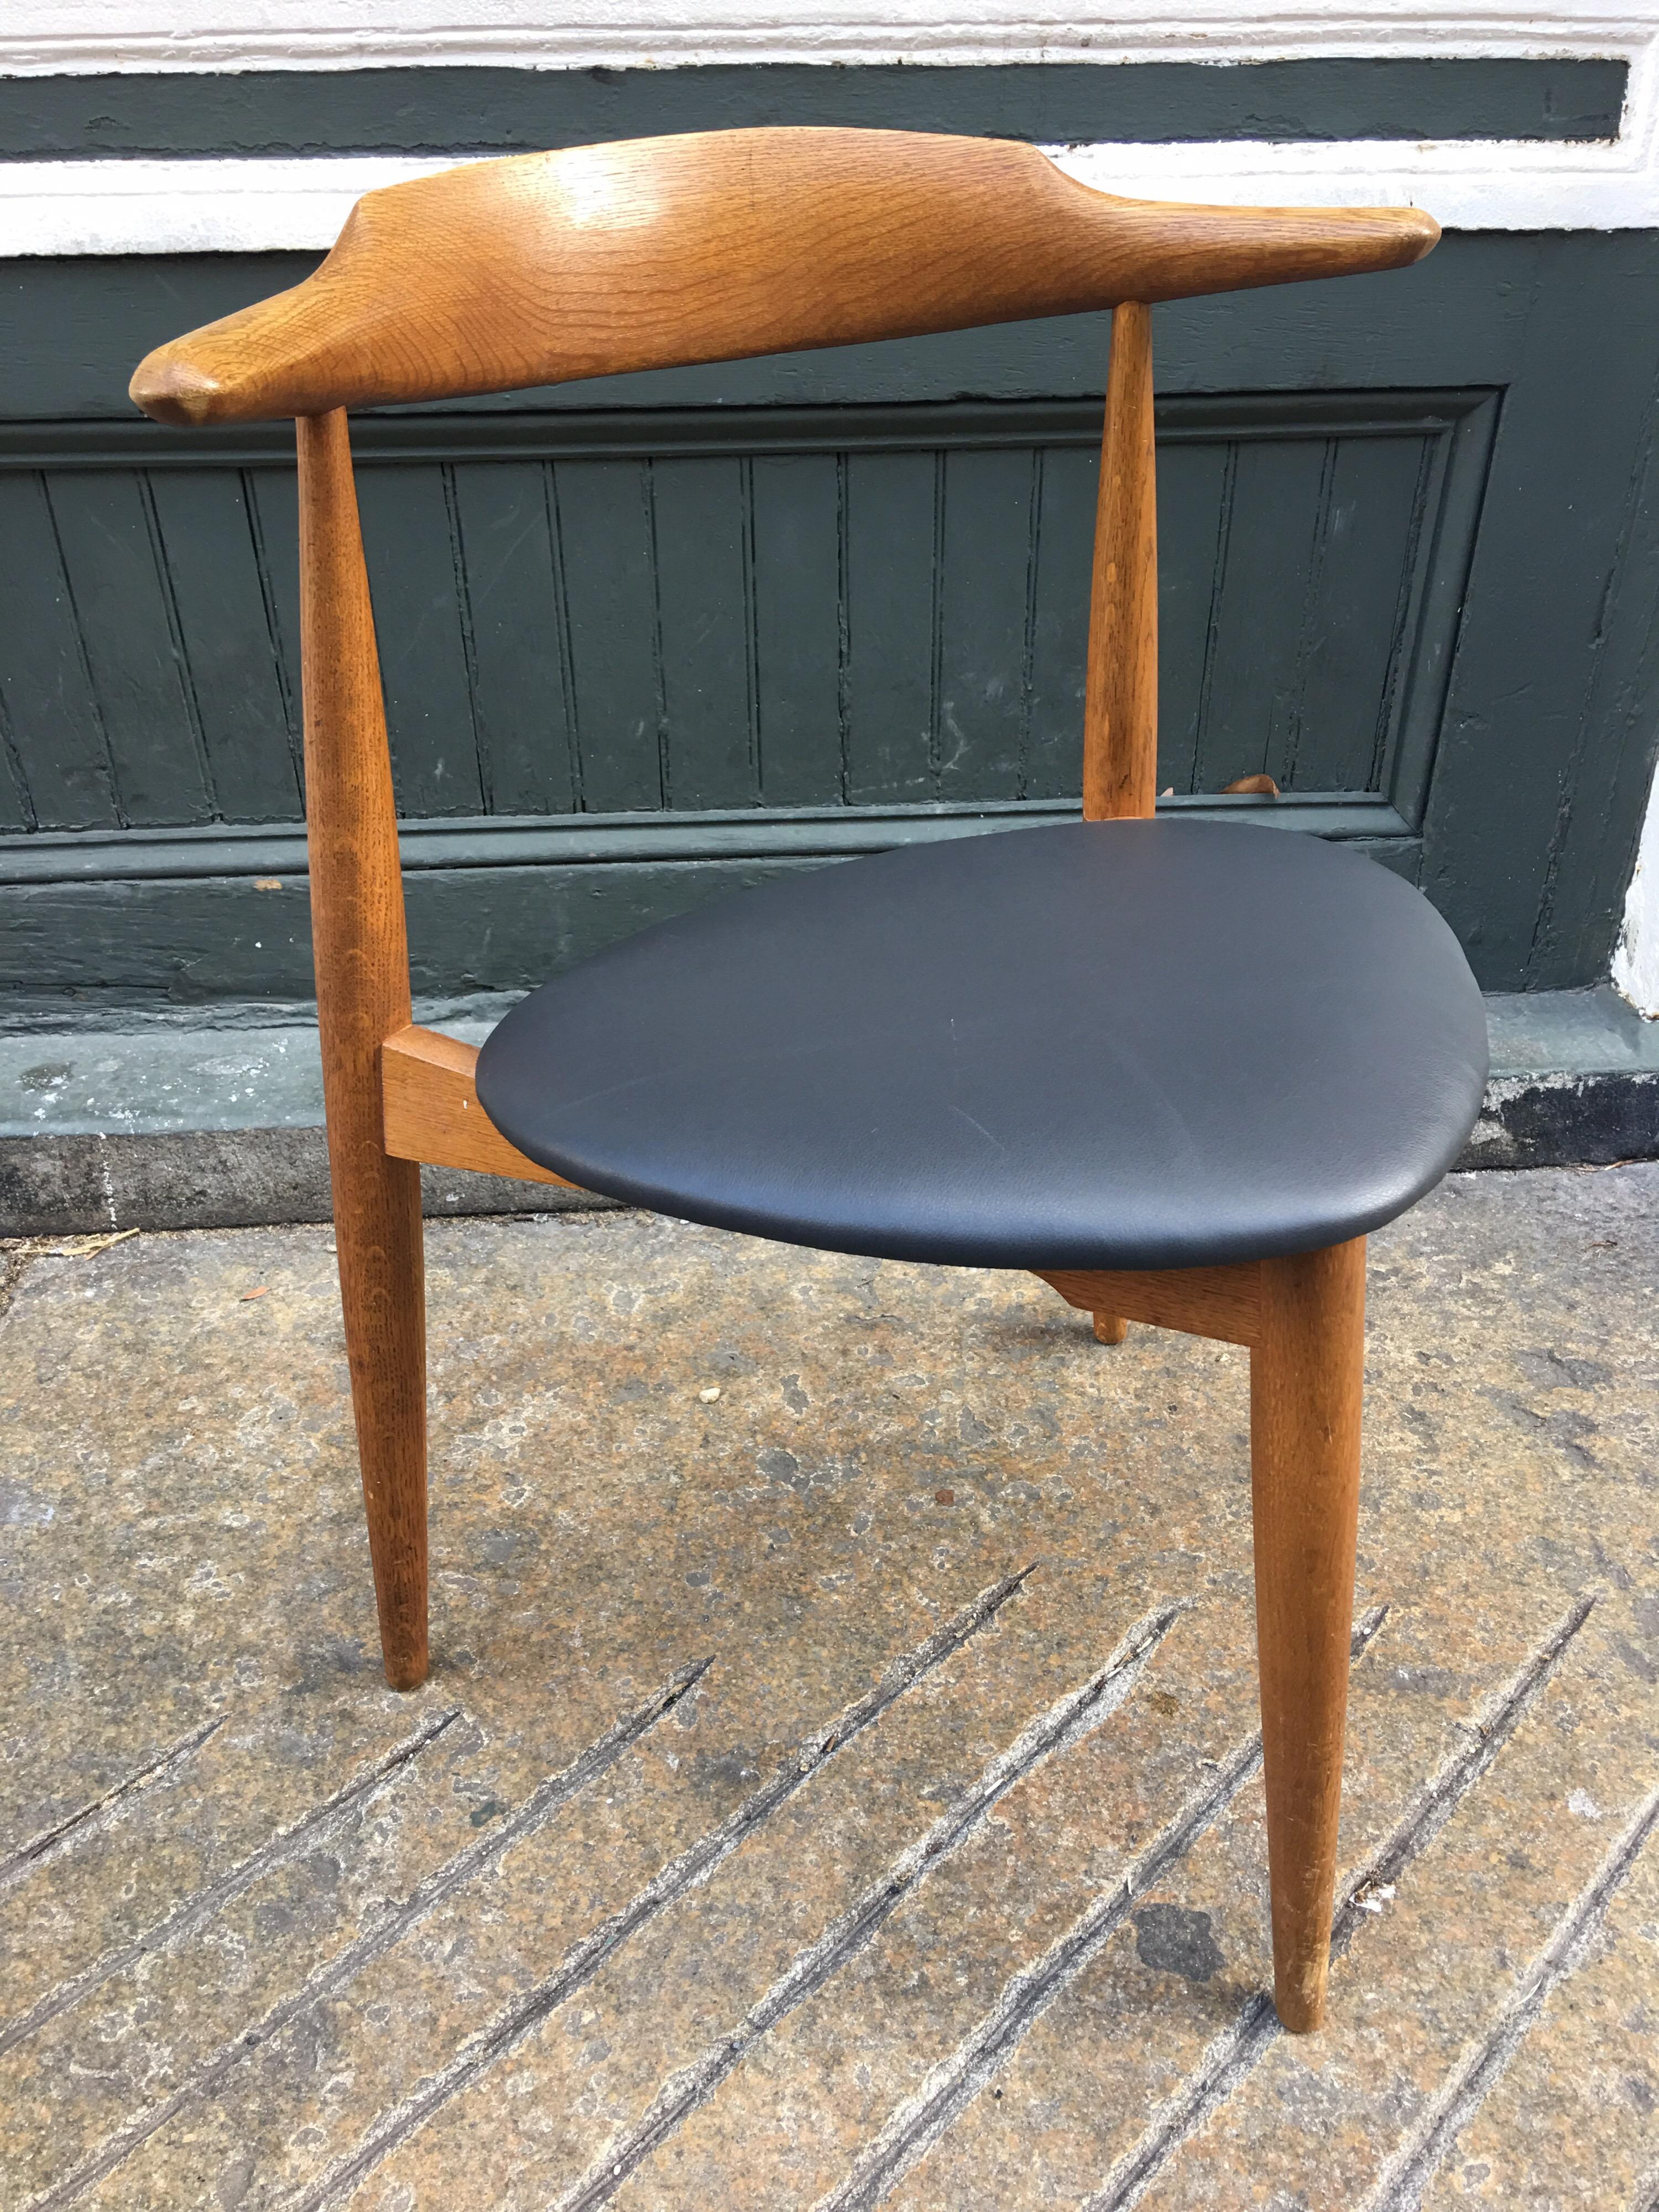 Nice pair of Hans Wegner stacking heart chairs for Fritz Hansen furniture. New chocolate leather seat pads make these chairs ready to go! Fumed oak frames, classic 3-legged design.
Sold as a pair!